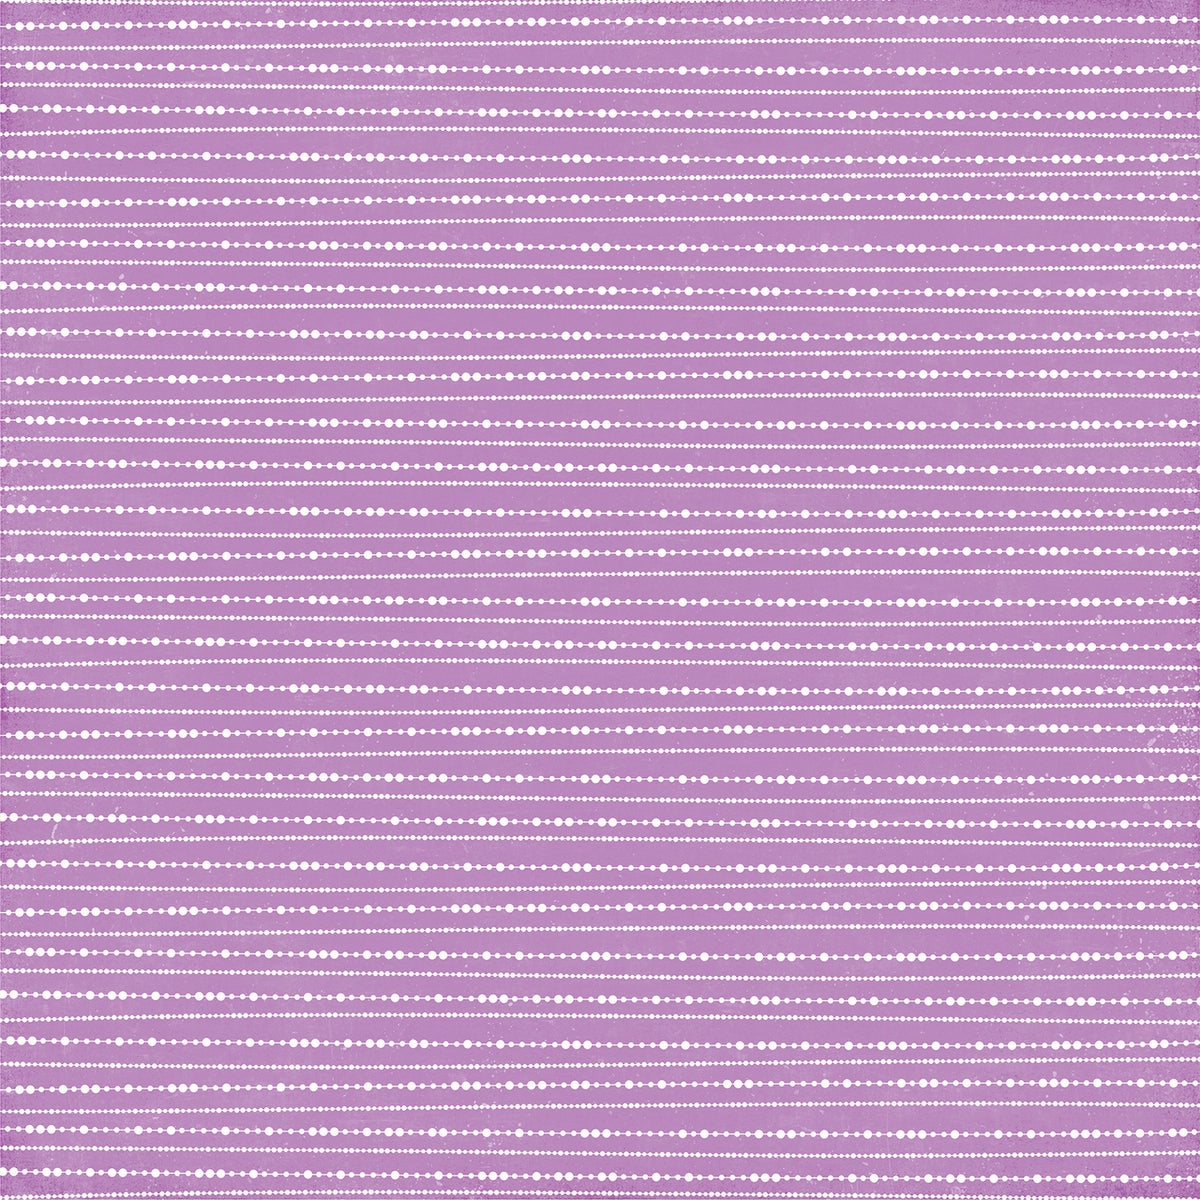 Side B - string-dots in white on a purple background